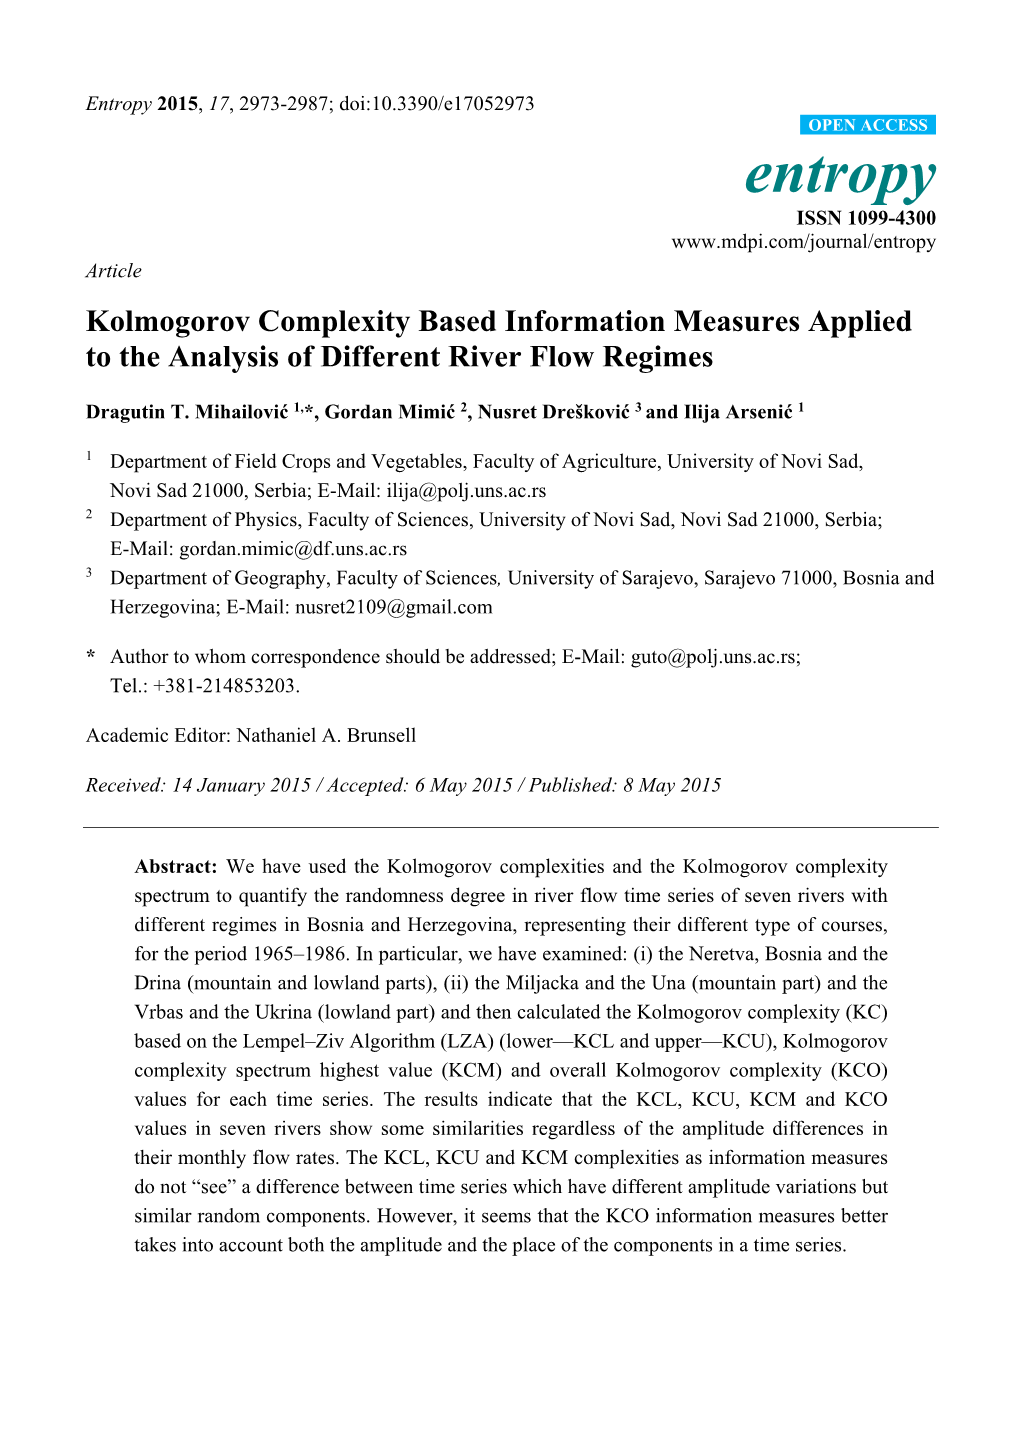 Kolmogorov Complexity Based Information Measures Applied to the Analysis of Different River Flow Regimes